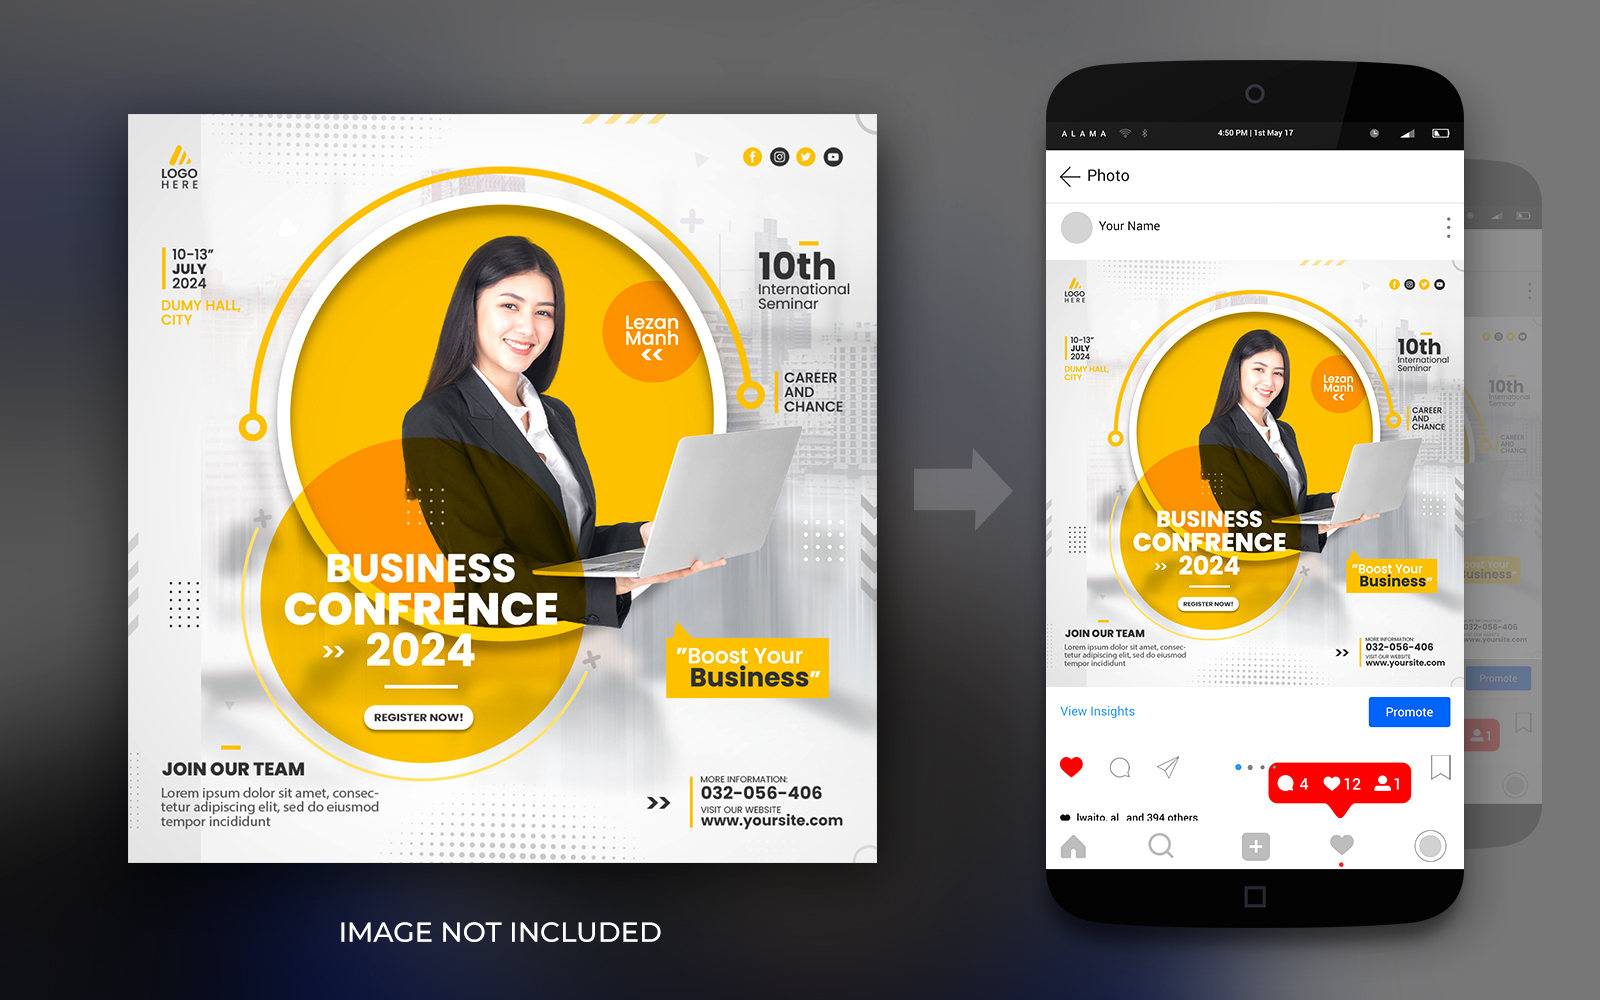 Business Conference Live Online Webinar And Corporate Social Media Post Template